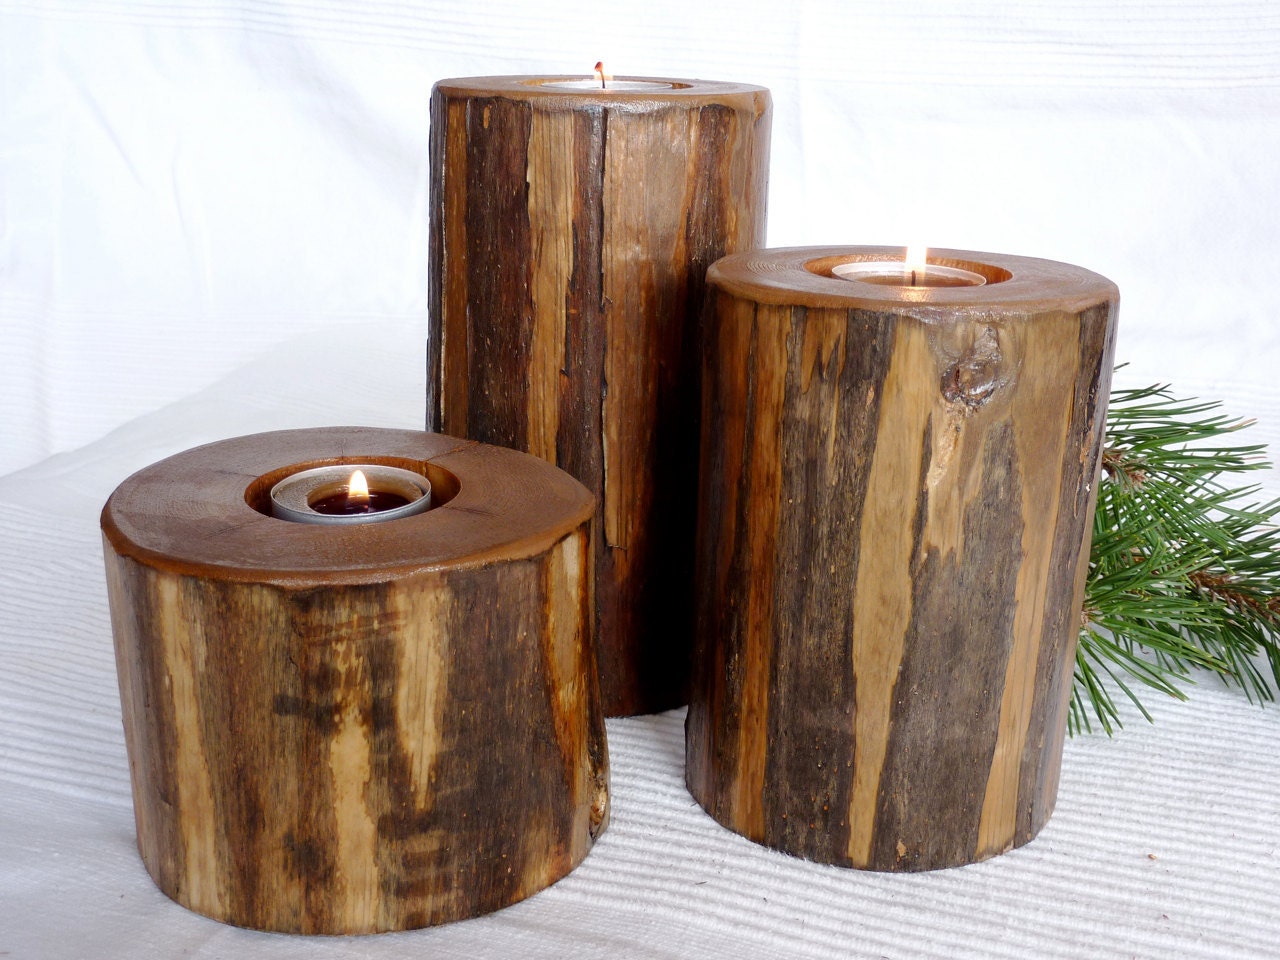 THE LODGEPOLE Candle Holders:  Rustic Hand-peeled Lodgepole Pine Candle Holders - SpeakingMountain